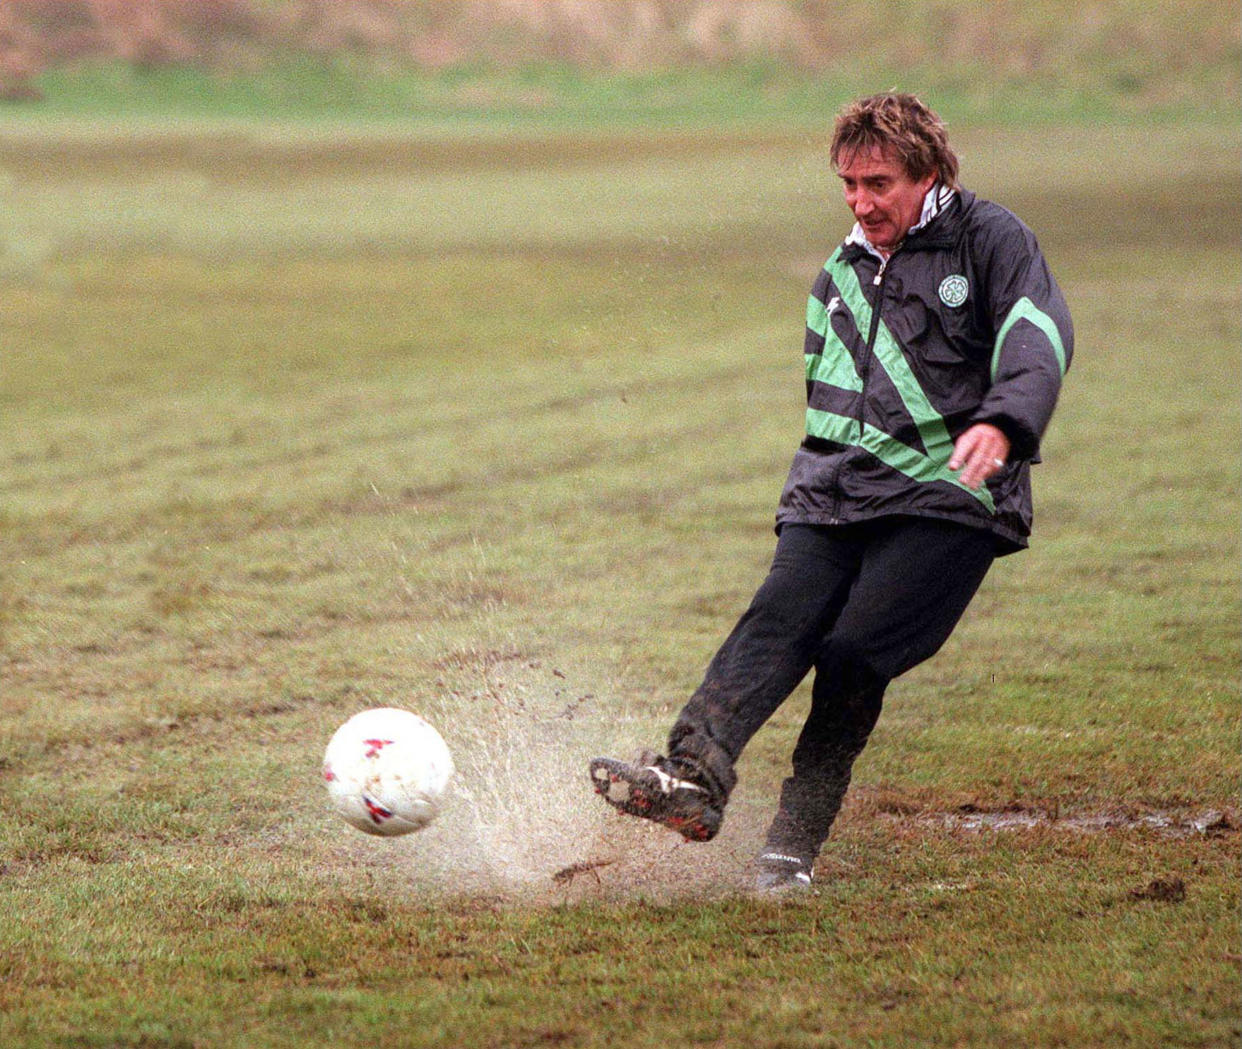 LONDON - 1999: Singer Rod Stewart plays football at his house in Essex on the day he split from model wife Rachel Hunter. (Photo by Dave Hogan/Getty Images)